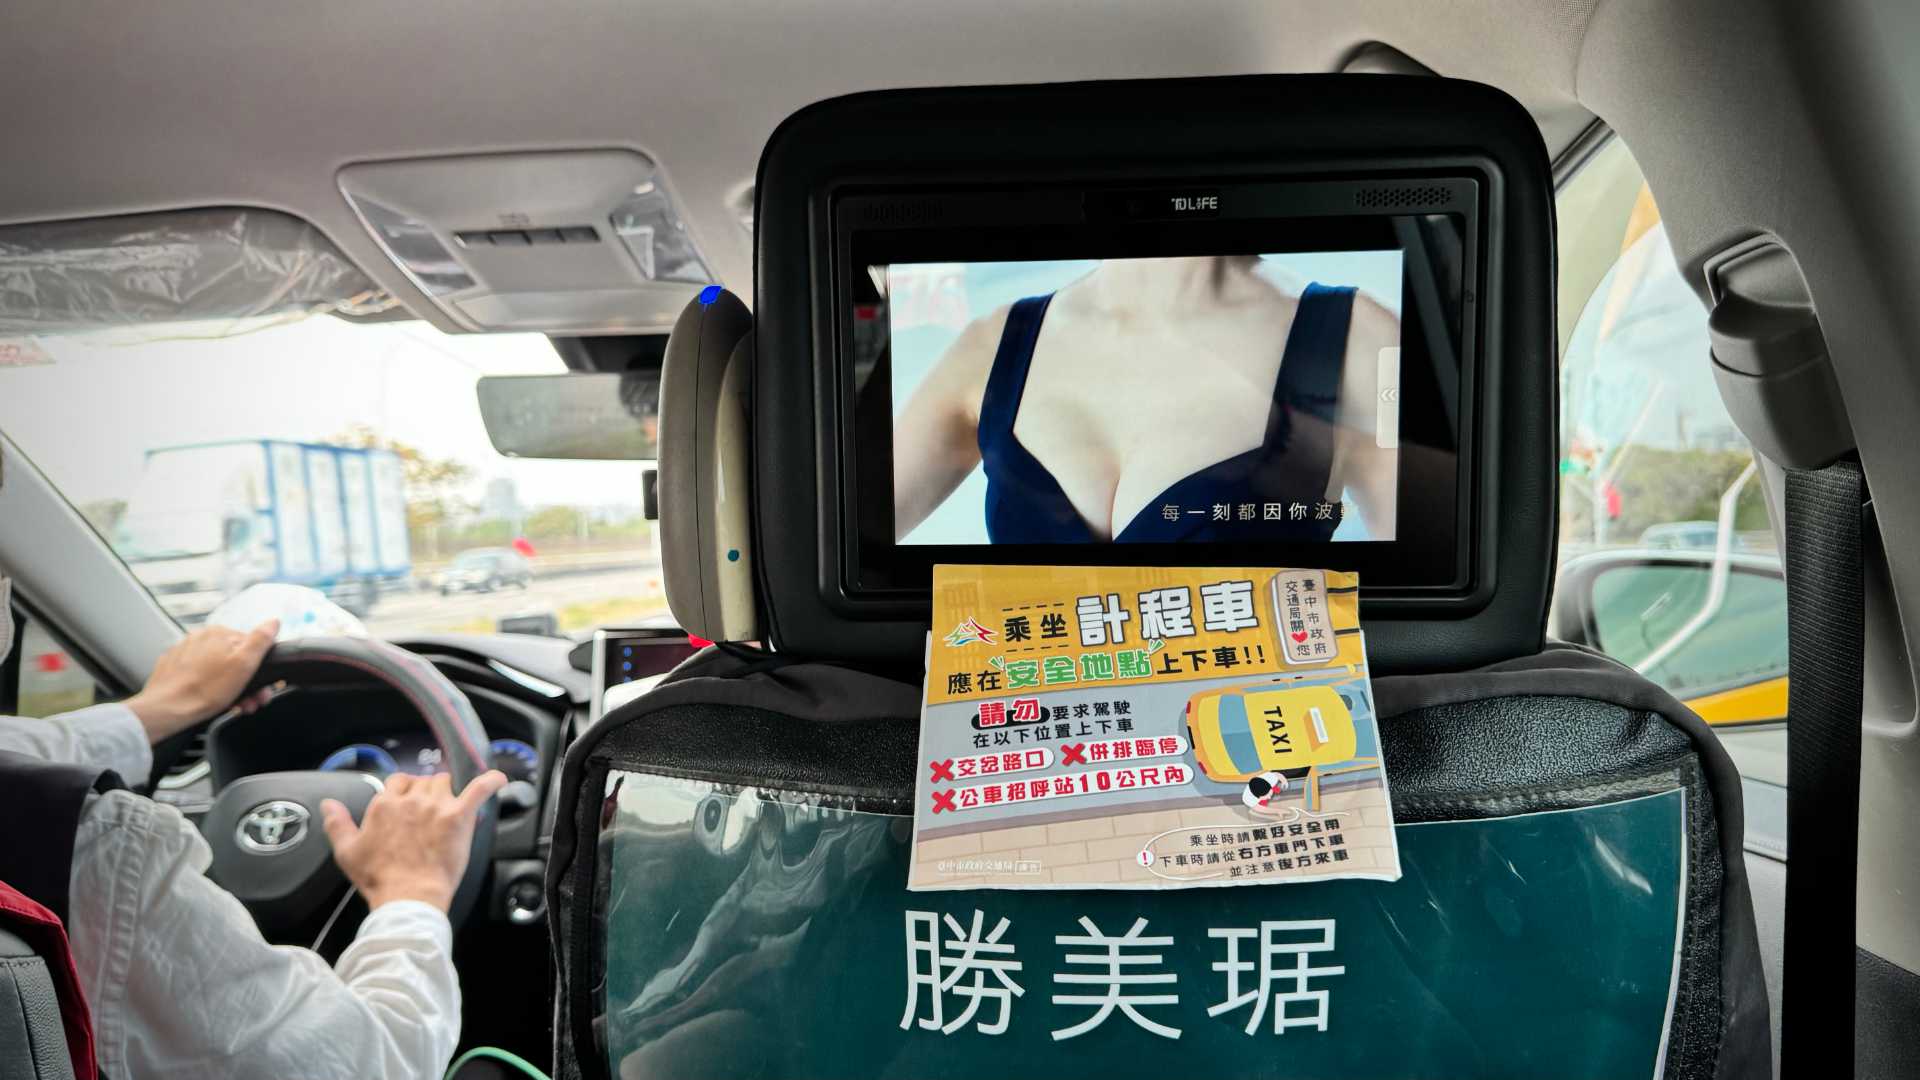 A headrest-mounted TV inside a taxi. The TV screen shows a close-up of a clothed woman’s chest.